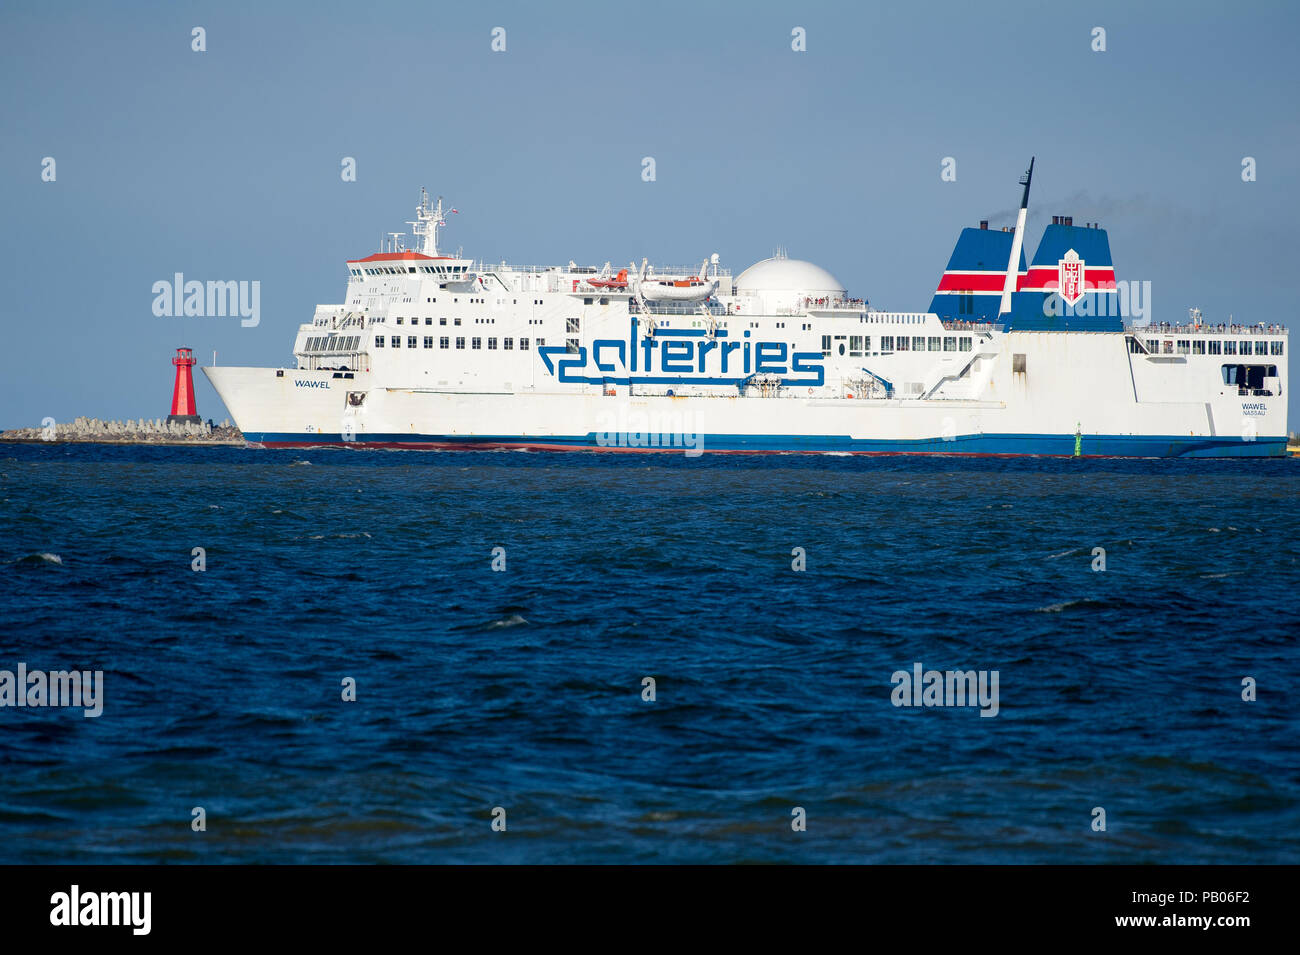 MS Wawel ferry owned by Polferries on its way to Nynashamn in Sweden in ...